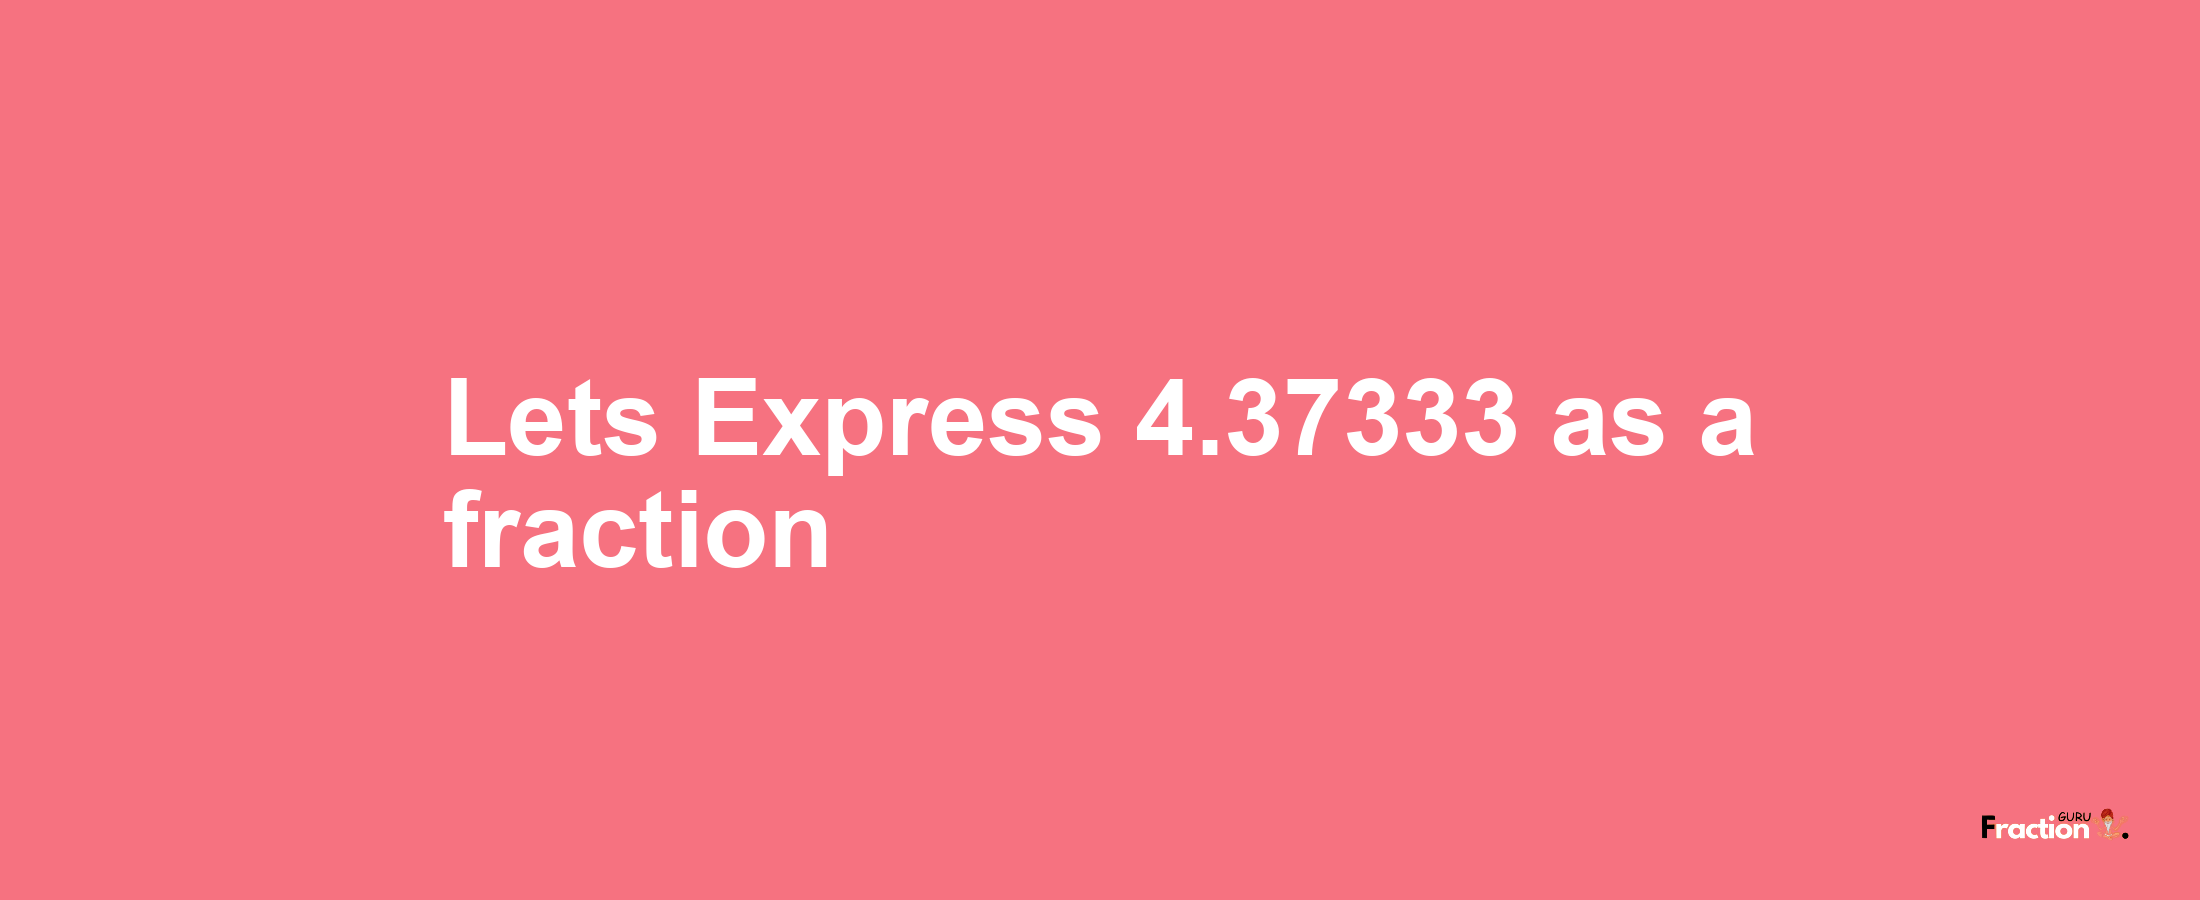 Lets Express 4.37333 as afraction